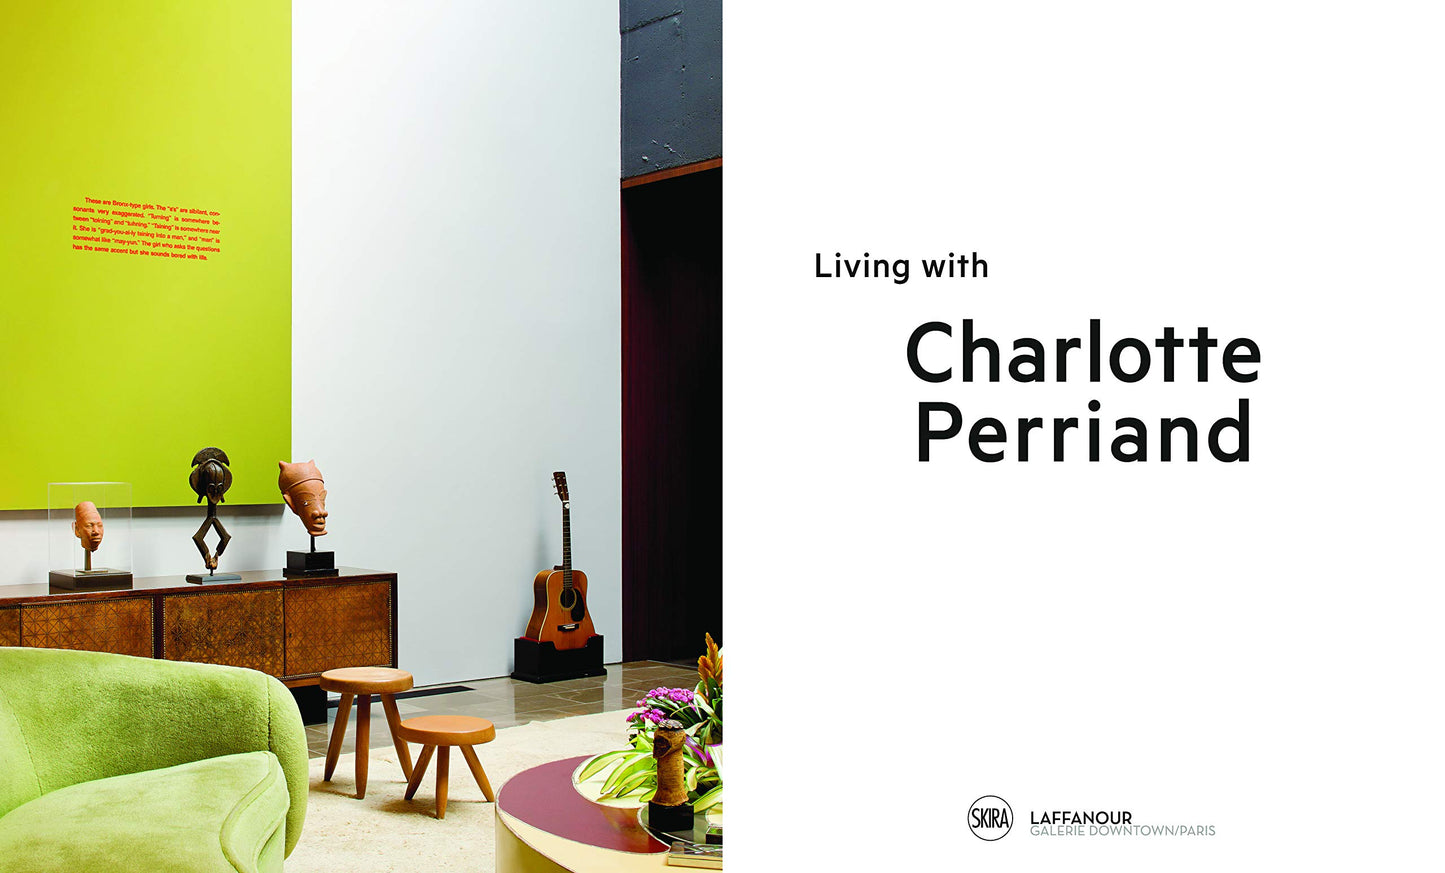 Living with Charlotte Periand